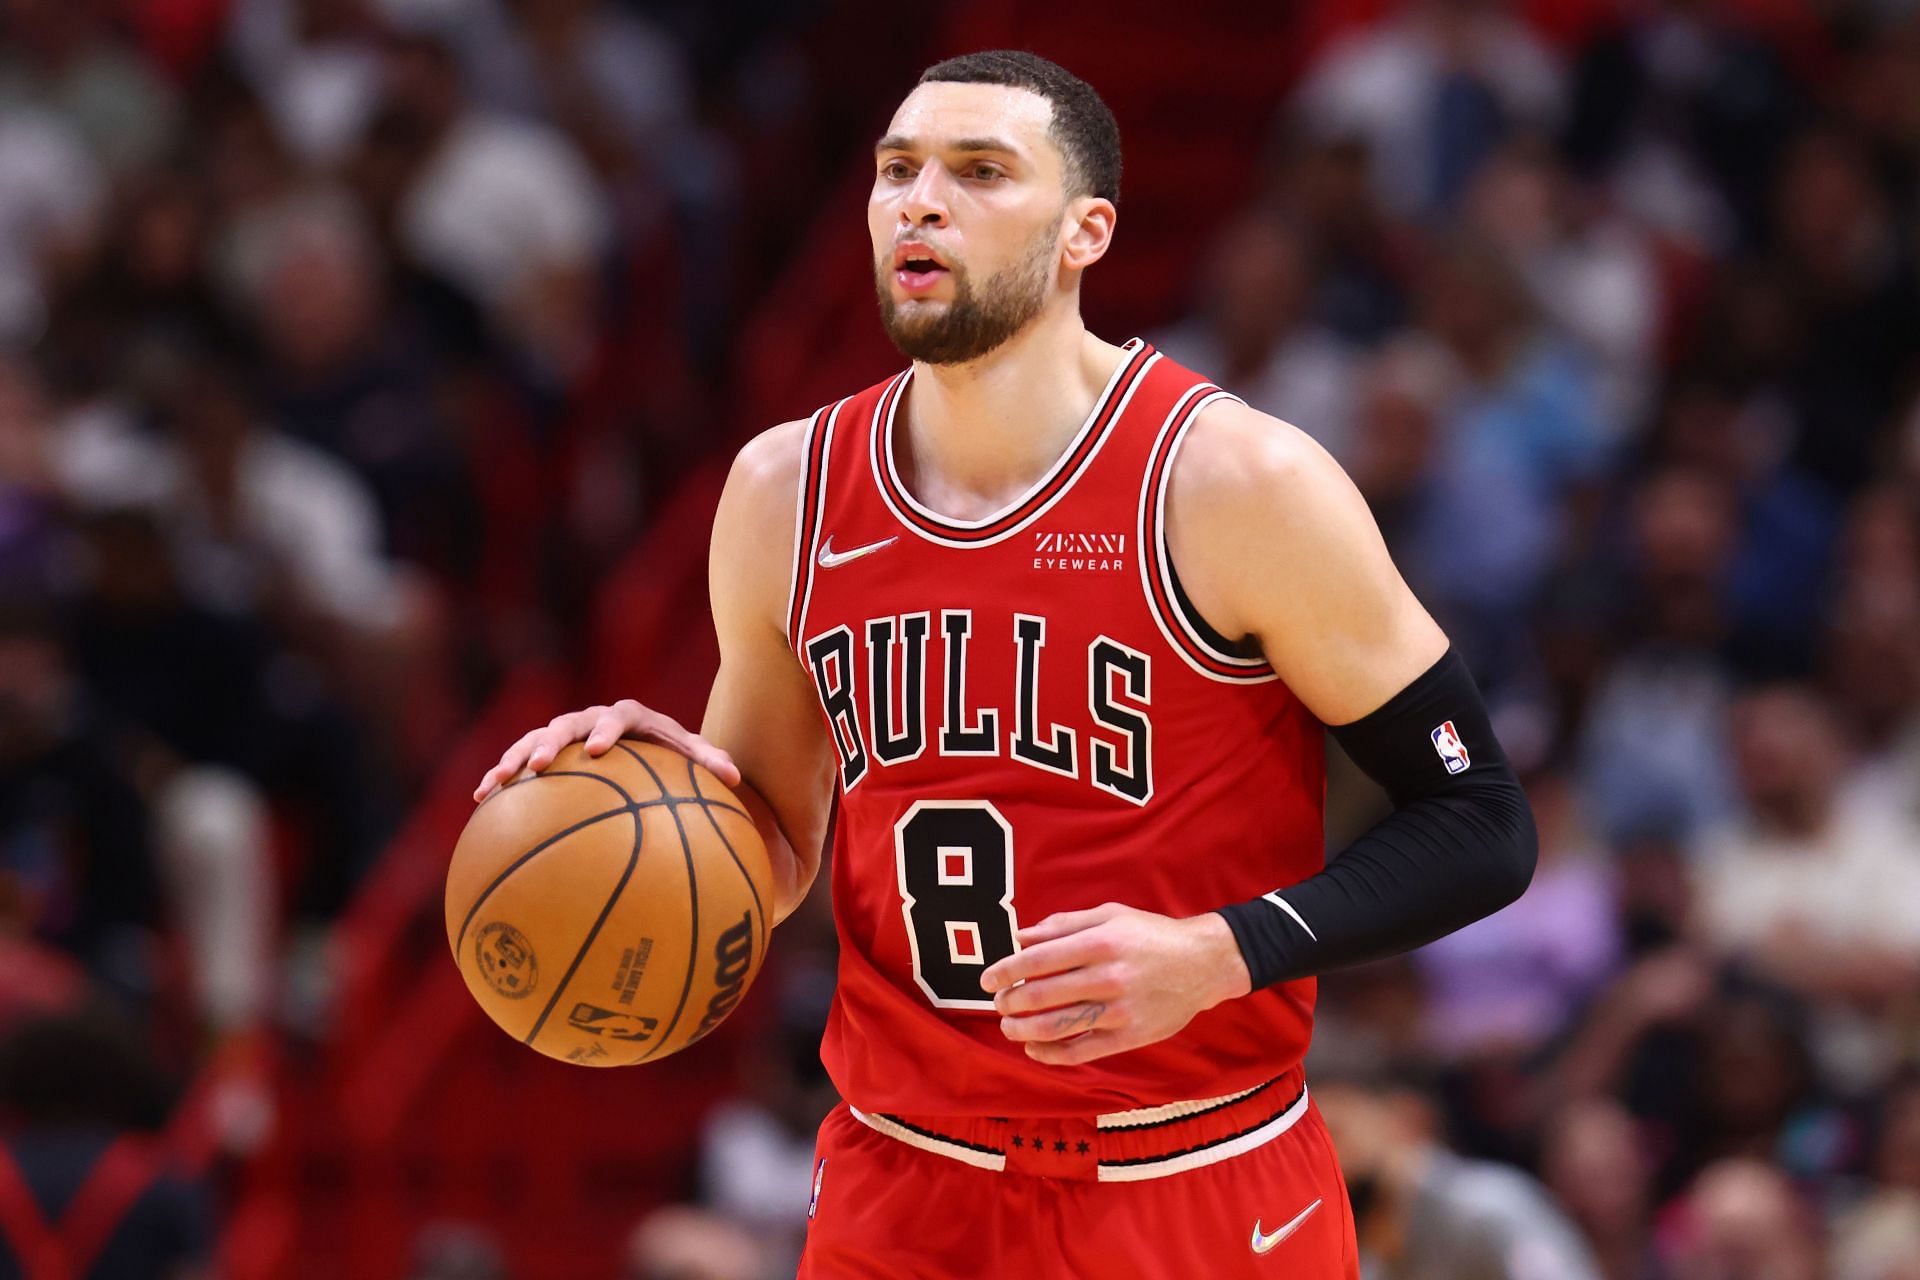 Chicago Bulls will lock horns with the New Orleans Pelicans on Thursday